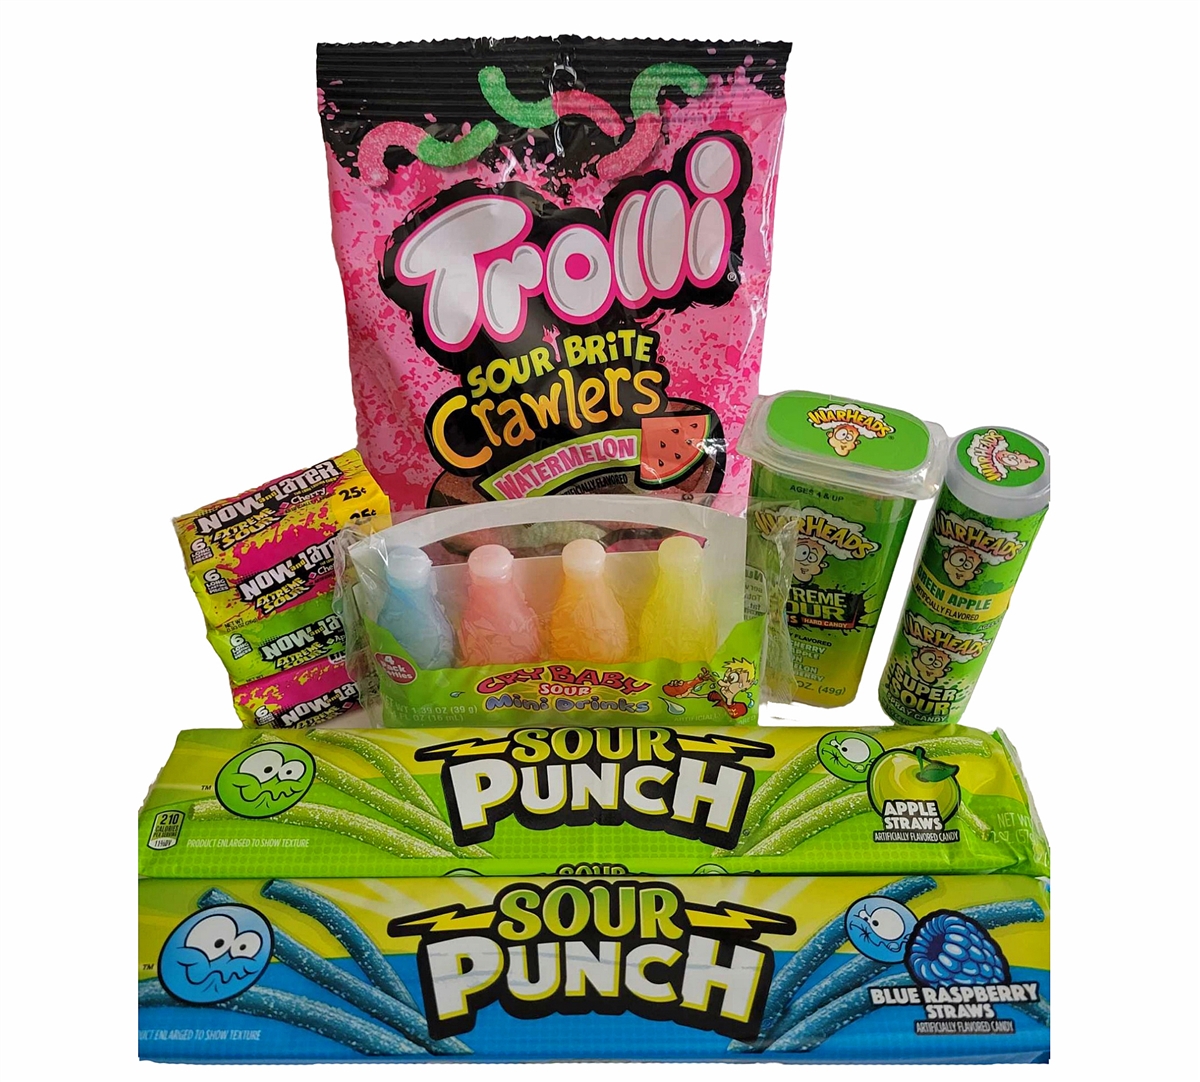 Get ready for a jaw quenching, tear jerking sour candy mix! This assortment includes the popular and highly favored sour candy brands. This 9 piece Sour Pack by Candy Attic prove